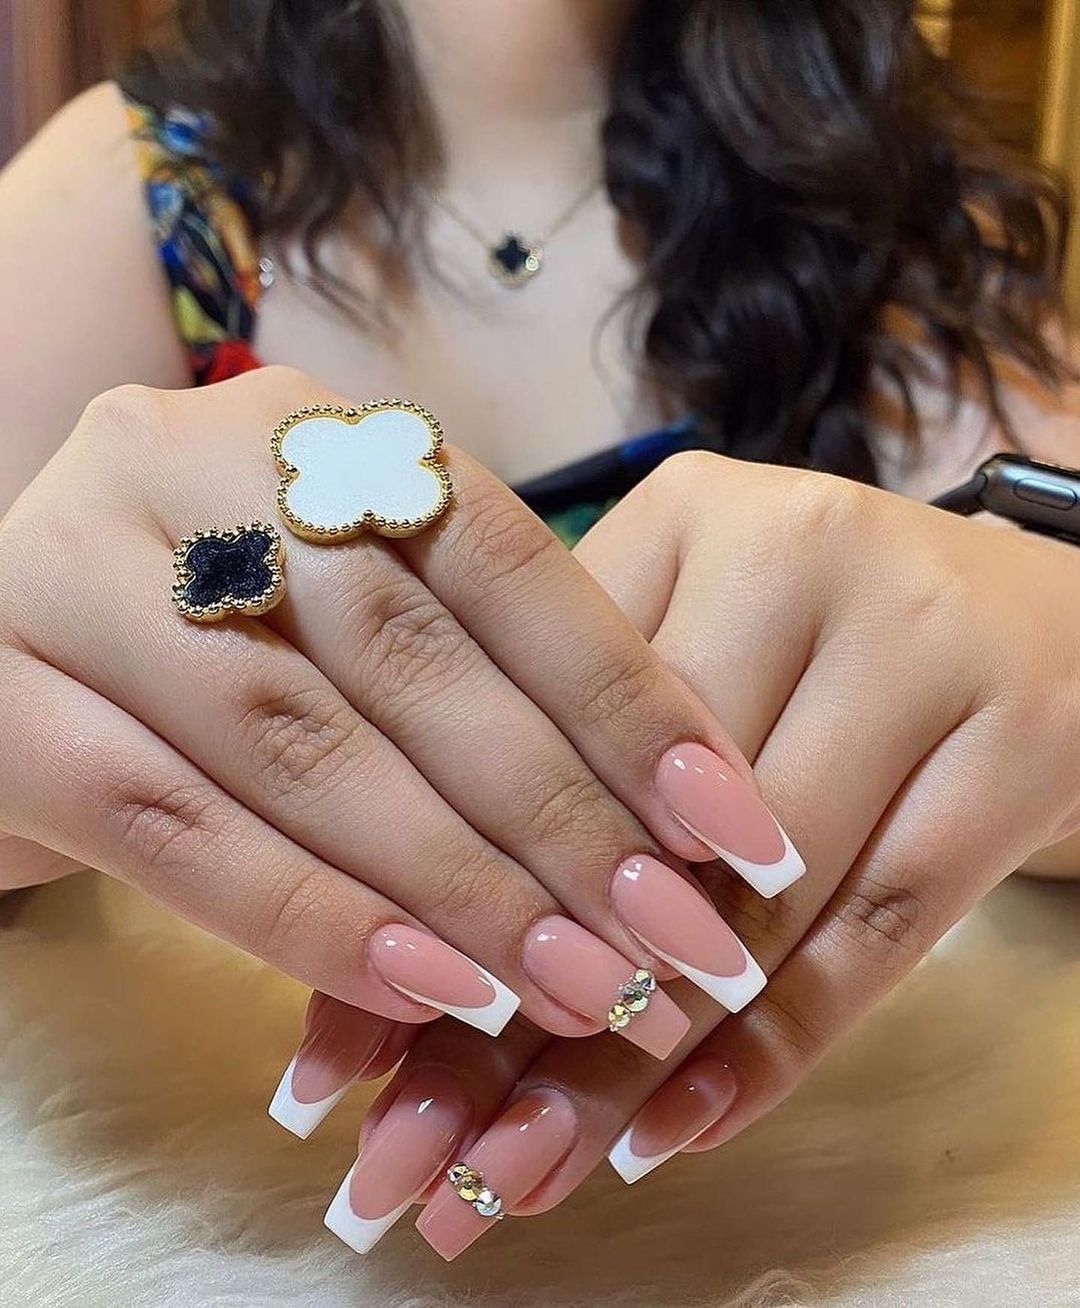 30 Easy Nails & Nail Art Designs To Try In 2022 images 1